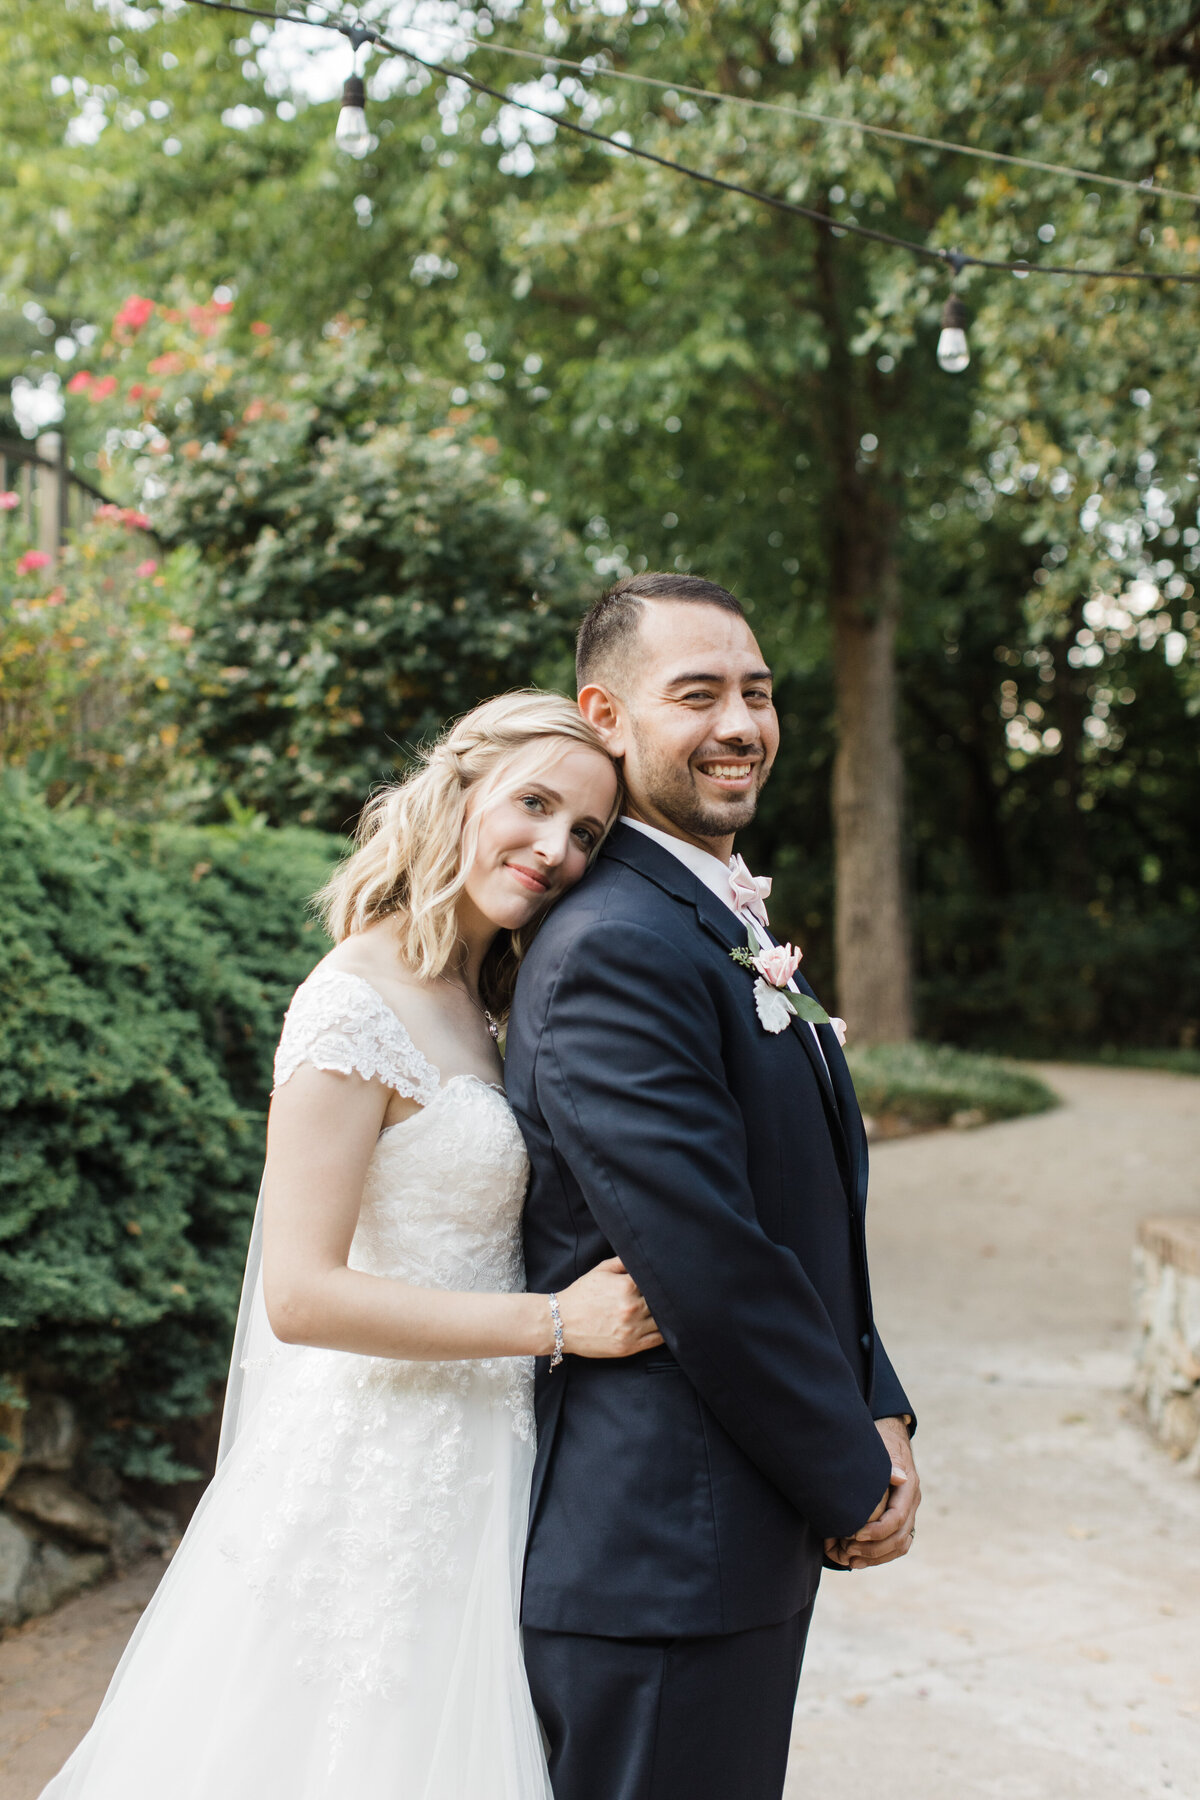 Portrait of a bride and groom on their wedding day in Fort Worth, Texas. The groom is smiling largely and standing tall while the bride is smiling coyly and leaning her head on his shoulder. The bride is wearing an intricate, white dress while the groom is wearing a dark suit with a boutonniere.